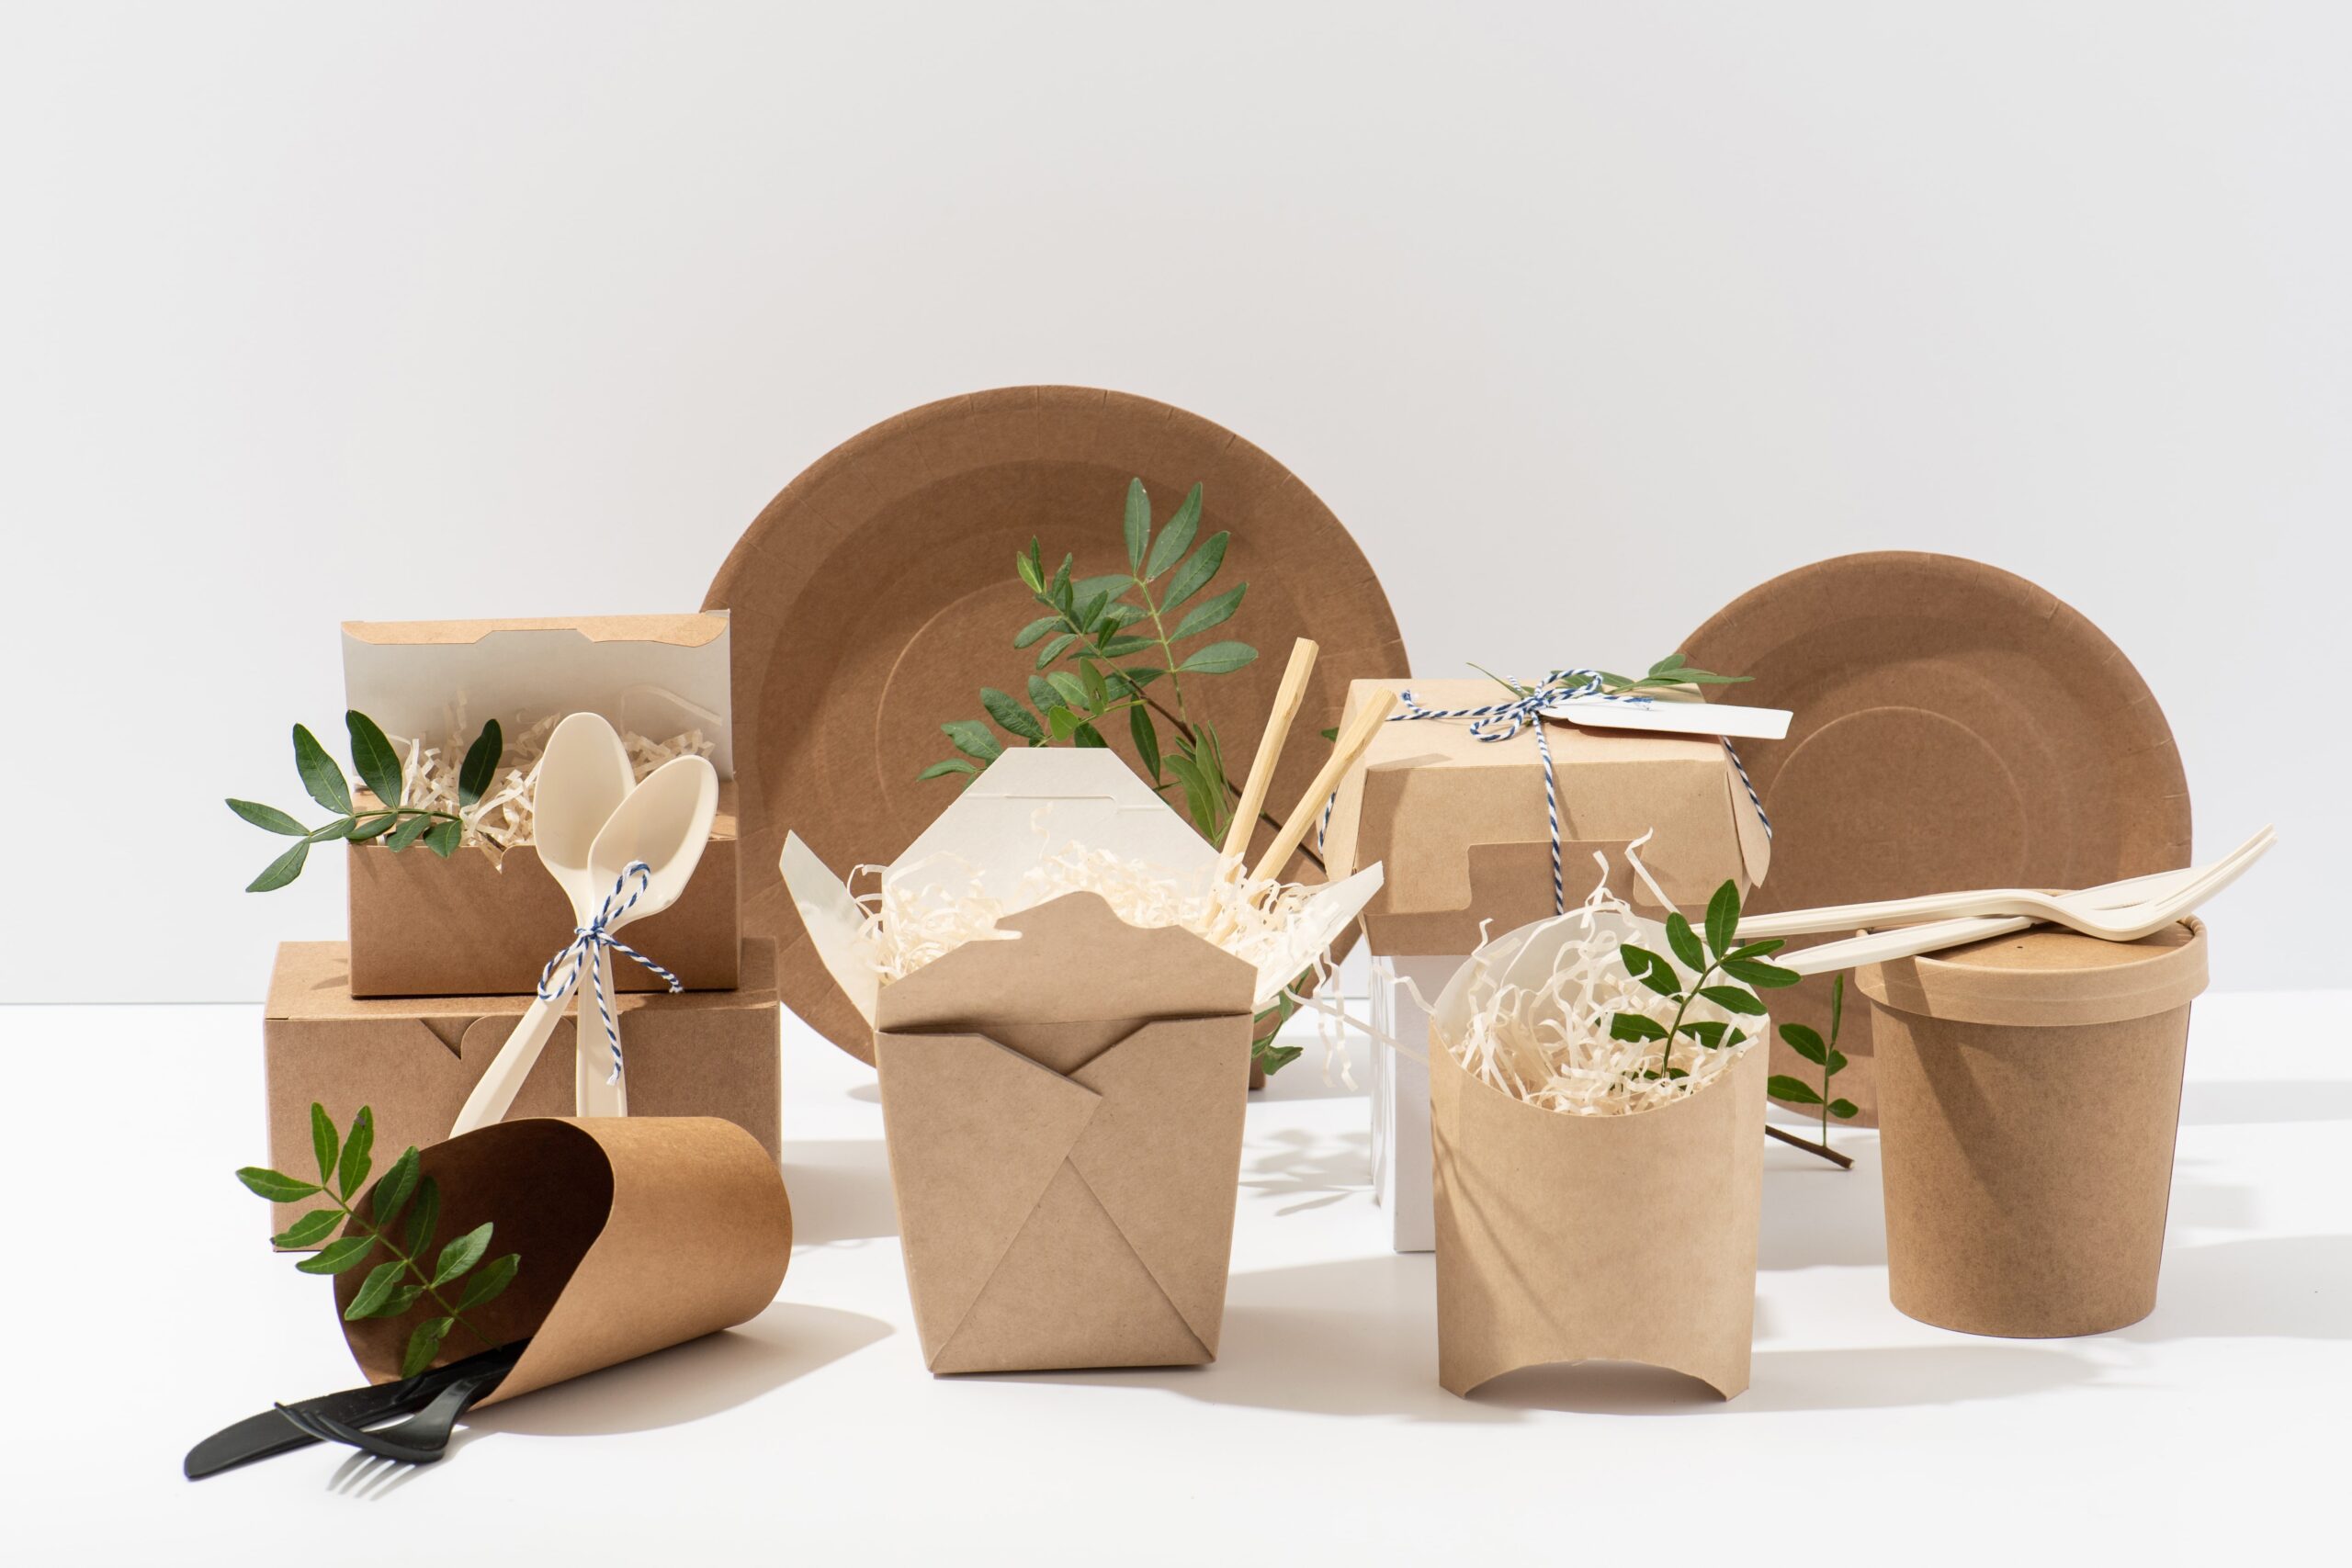 Sustainable packaging suggested by GEA